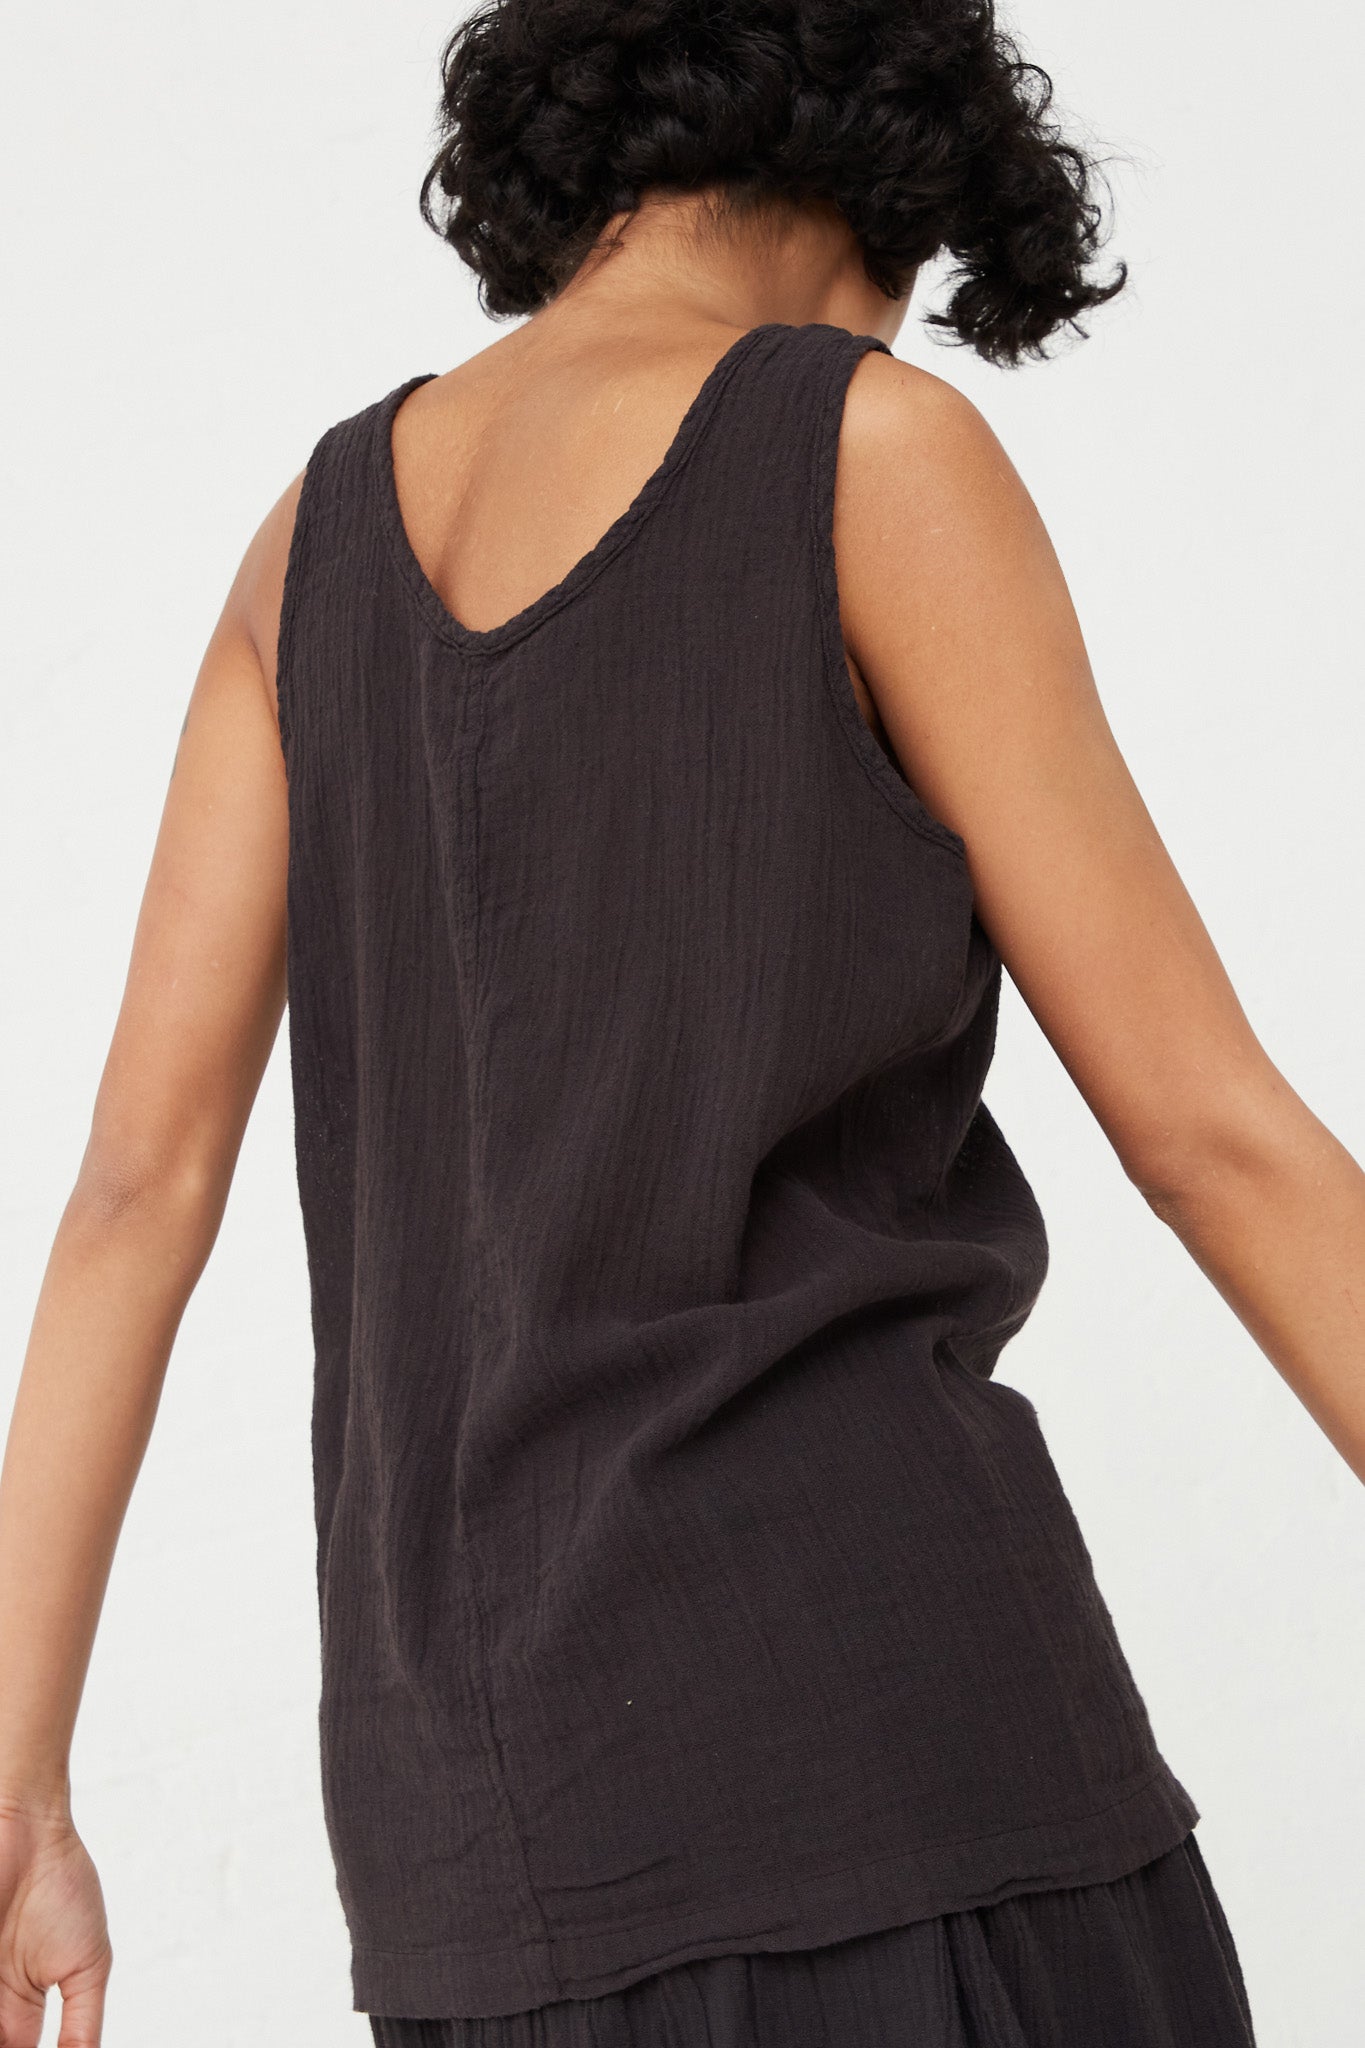 The back view of a woman wearing a Black Crane scoop neck cotton linen blend Tank Top in Black. Up close.